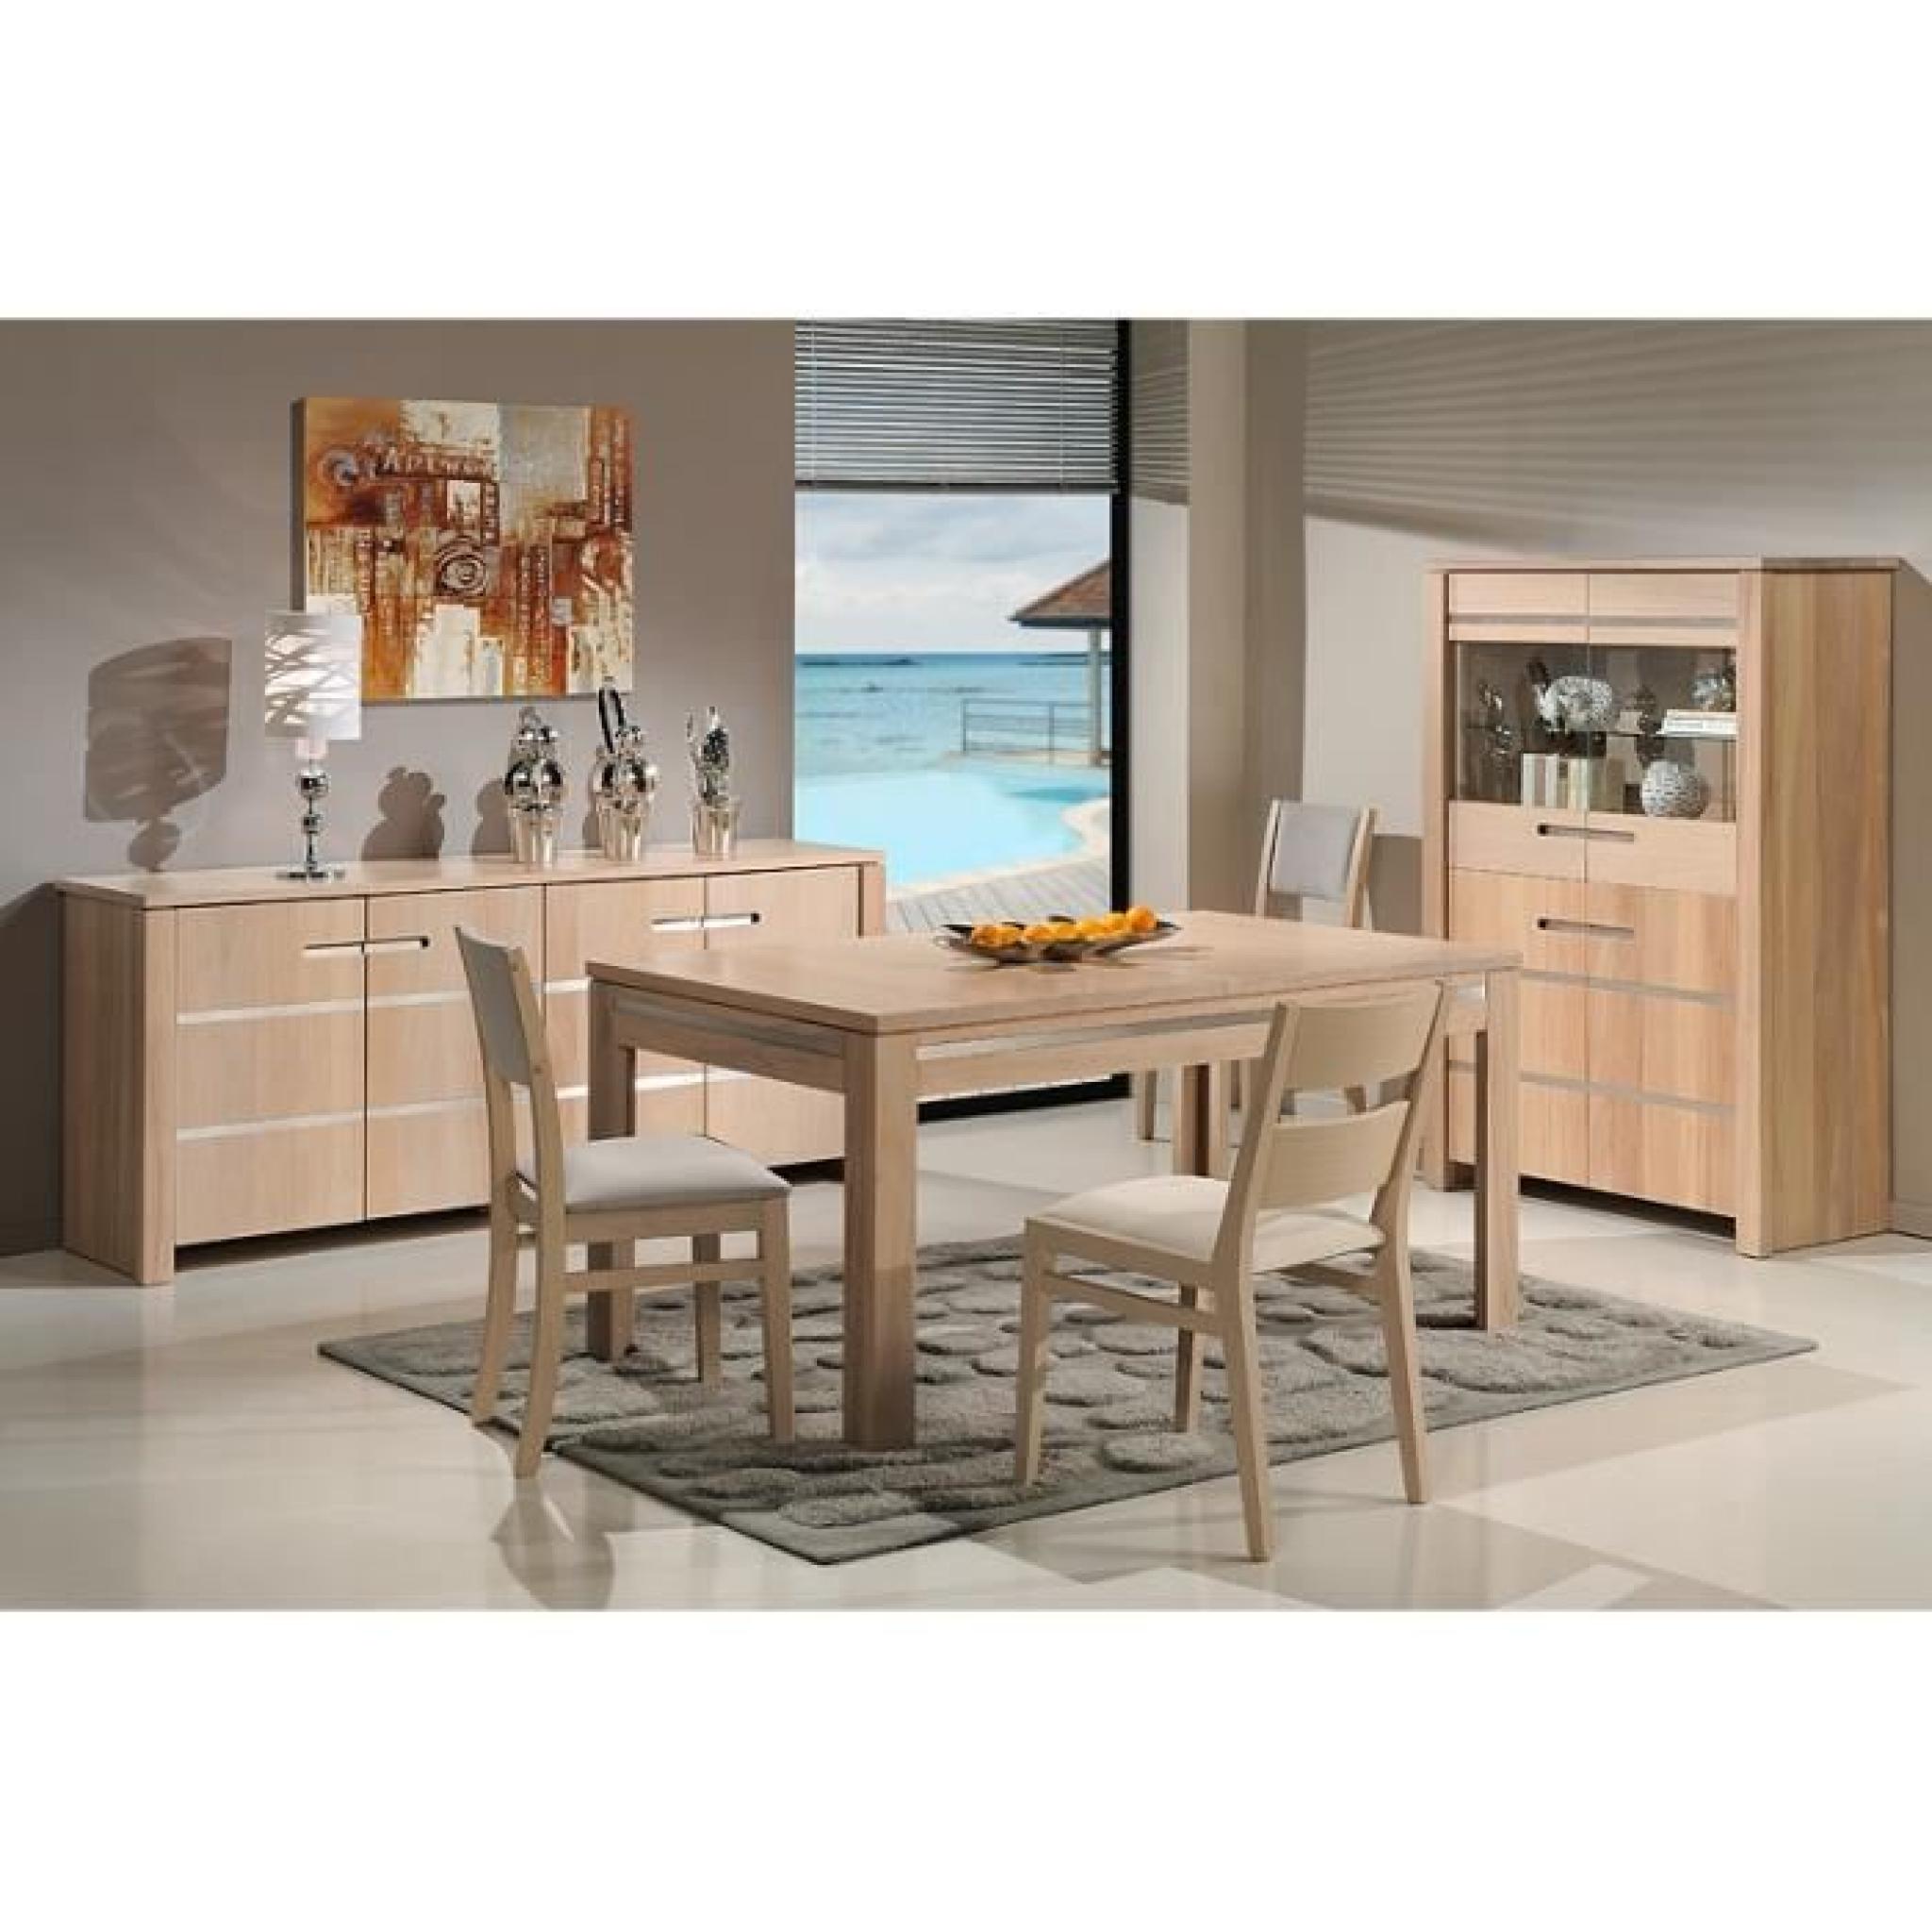 Table OPALE 180/95 ORME MASSIF-INOX (Orme - Taupe) pas cher